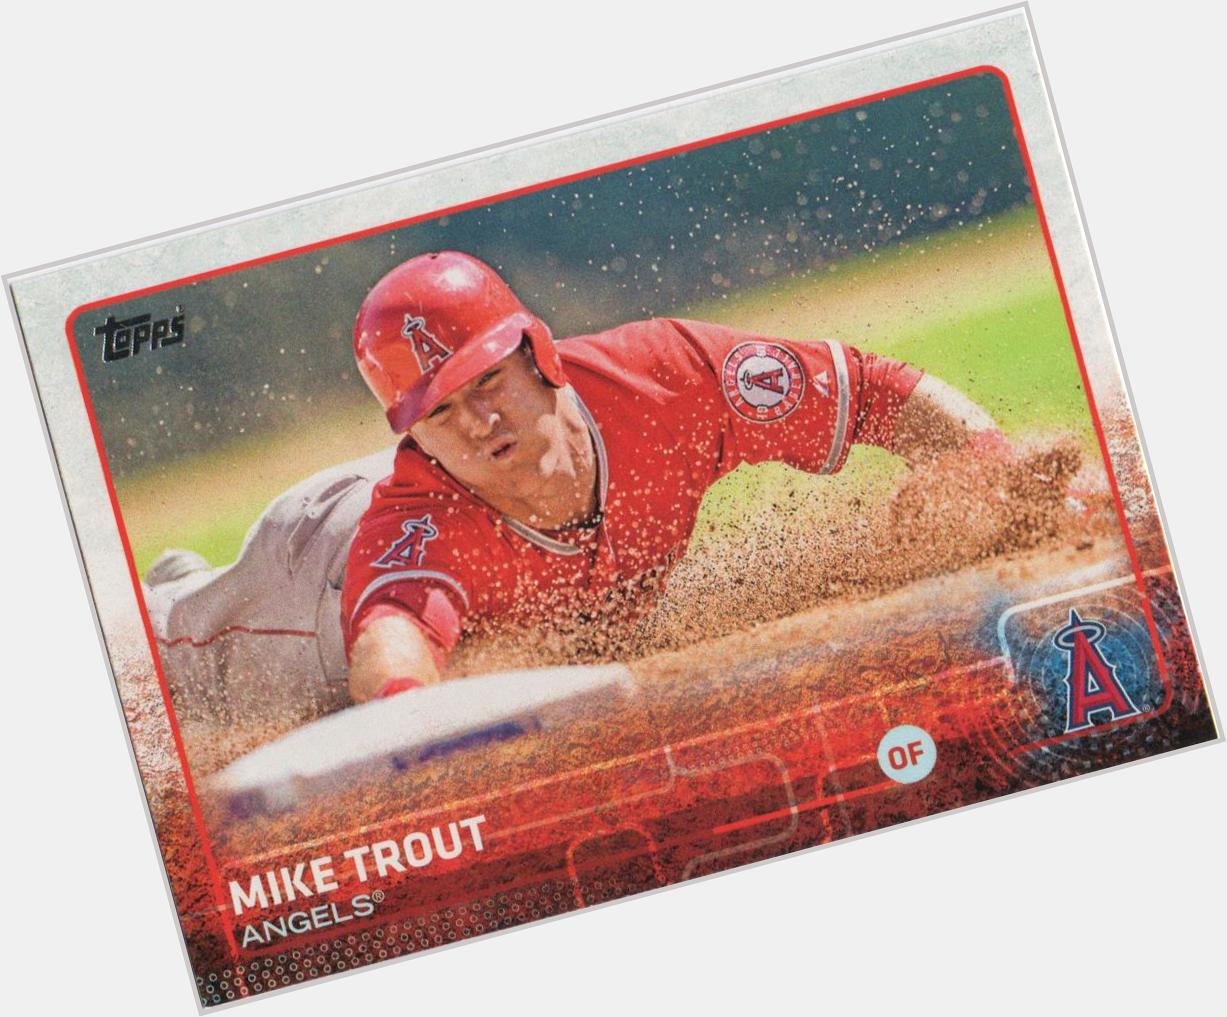 Happy birthday to the price of NJ, Mike Trout. 

His baseball cards:  